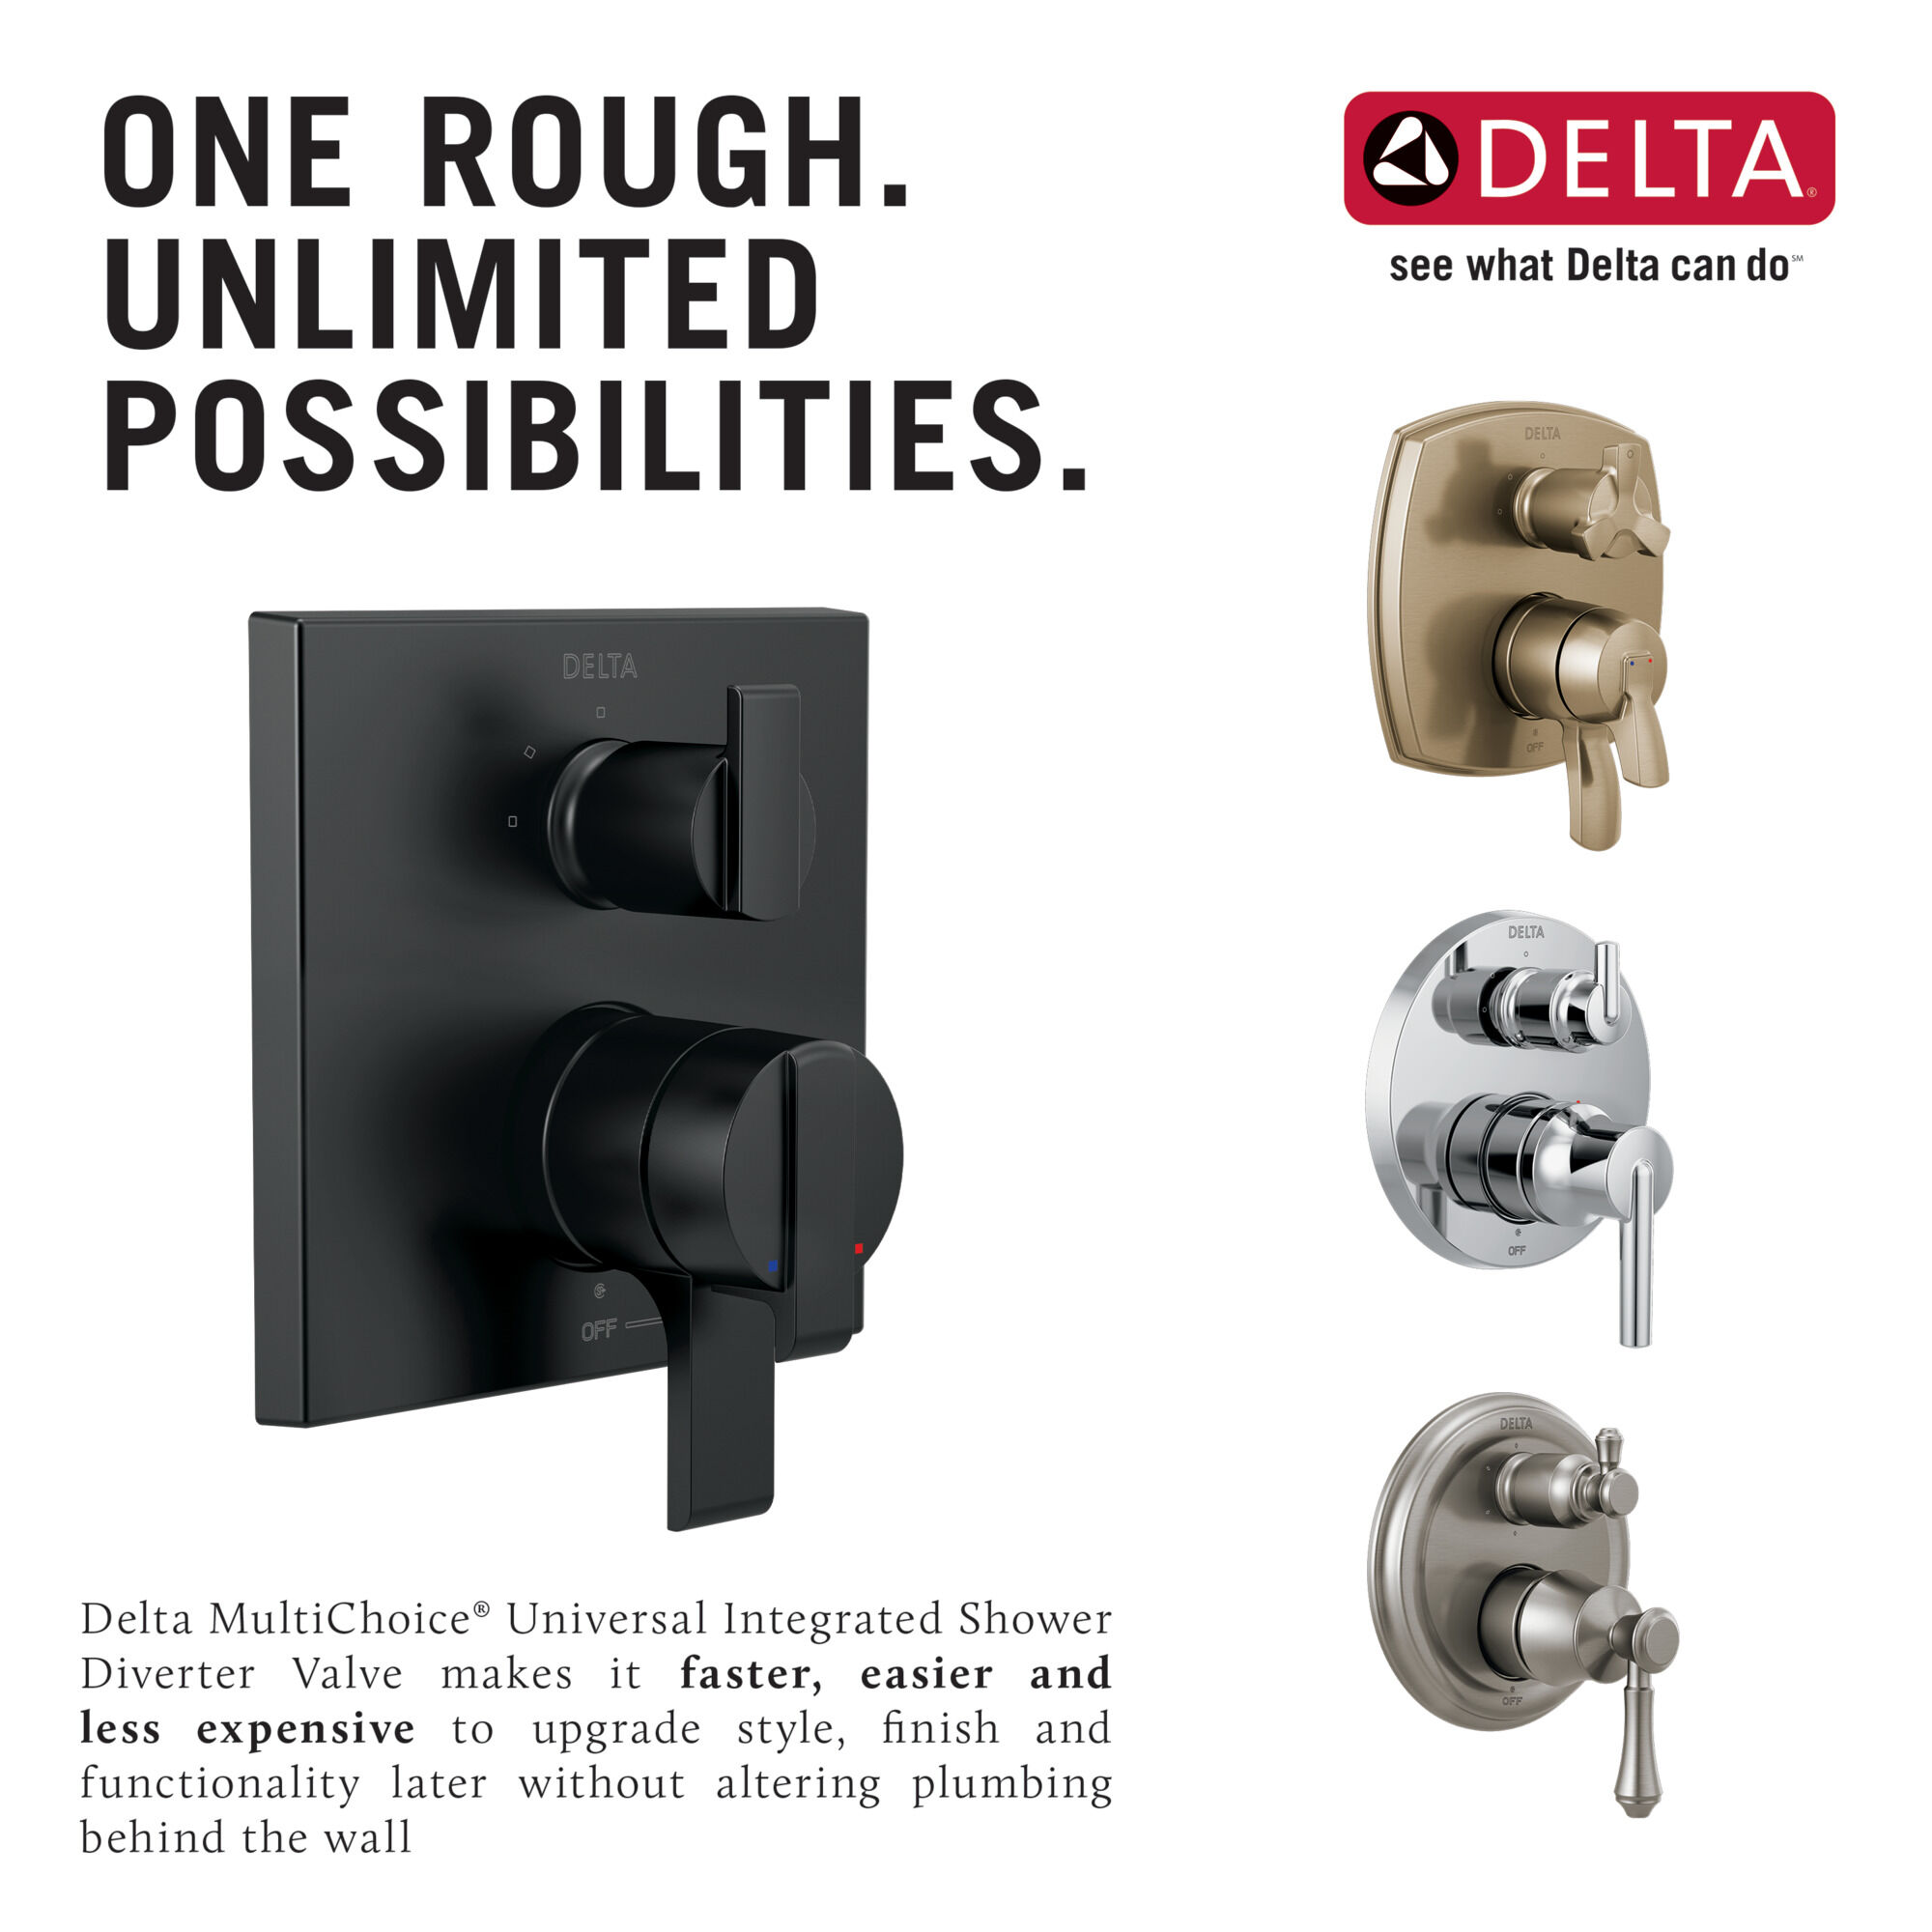 DELTA R22000-WS Multichoice Universal with Integrated Diverter Rough 